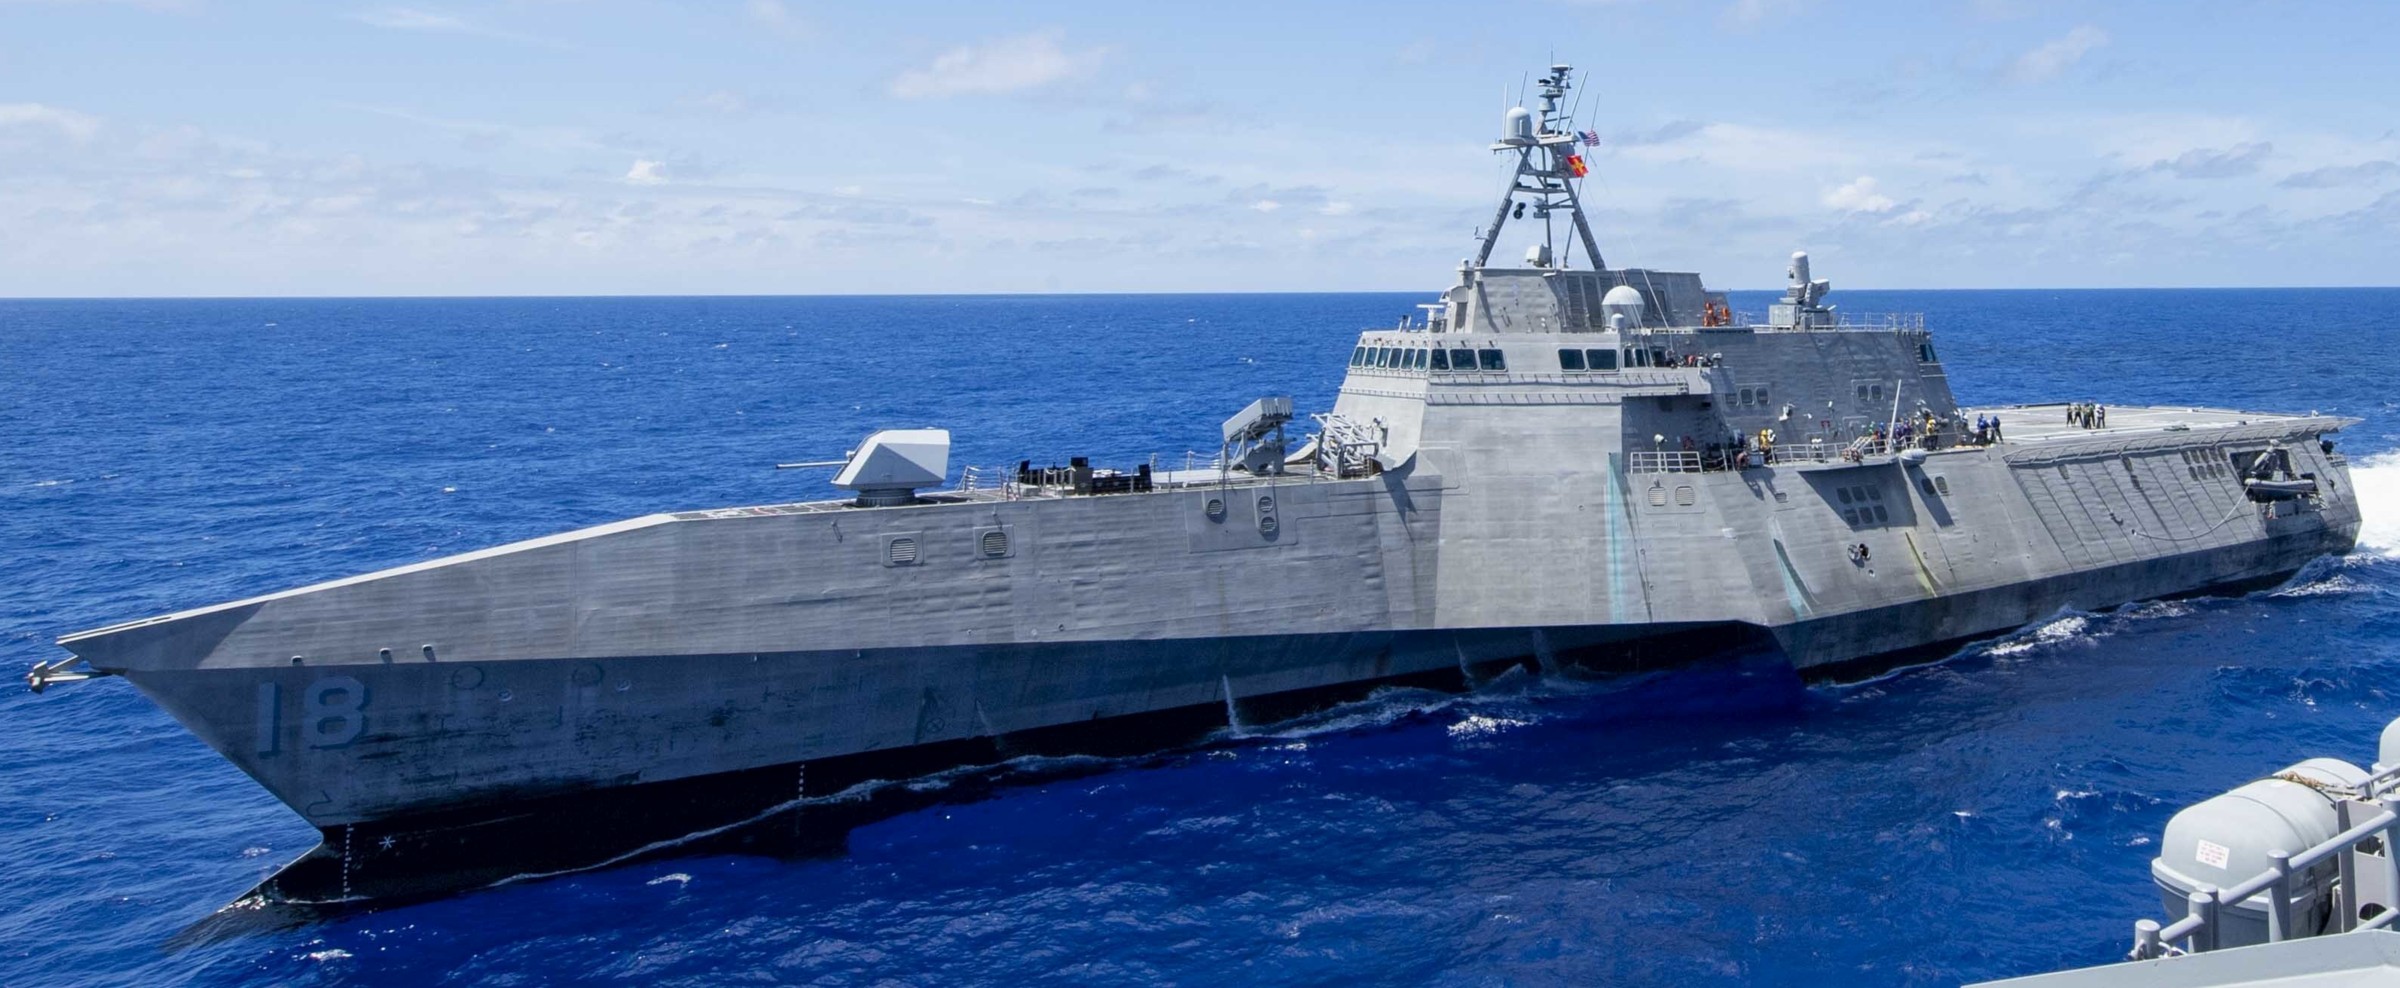 lcs-18 uss charleston independence class littoral combat ship us navy philippine sea 37